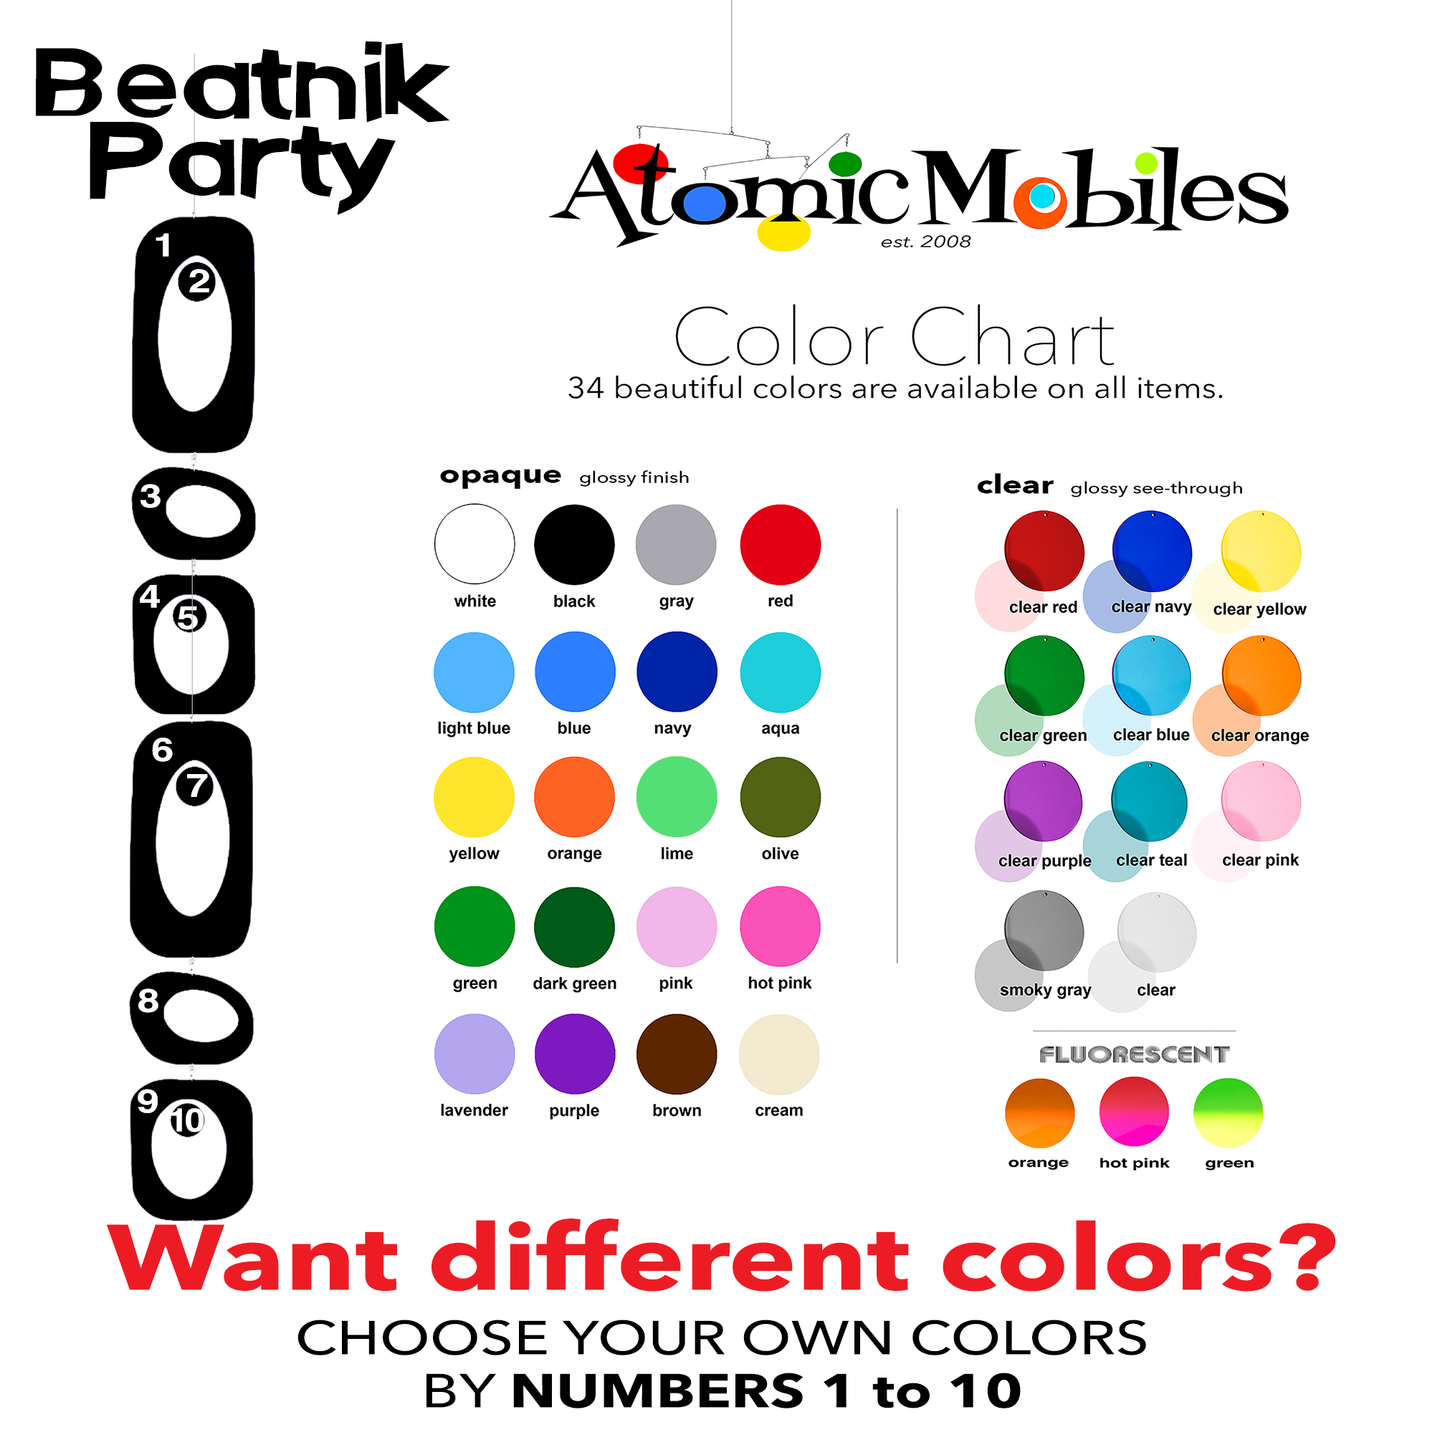 Color Chart for Mid Century Modern Retro Beatnik Party Christmas Decorations in colors YOU choose by AtomicMobiles.com